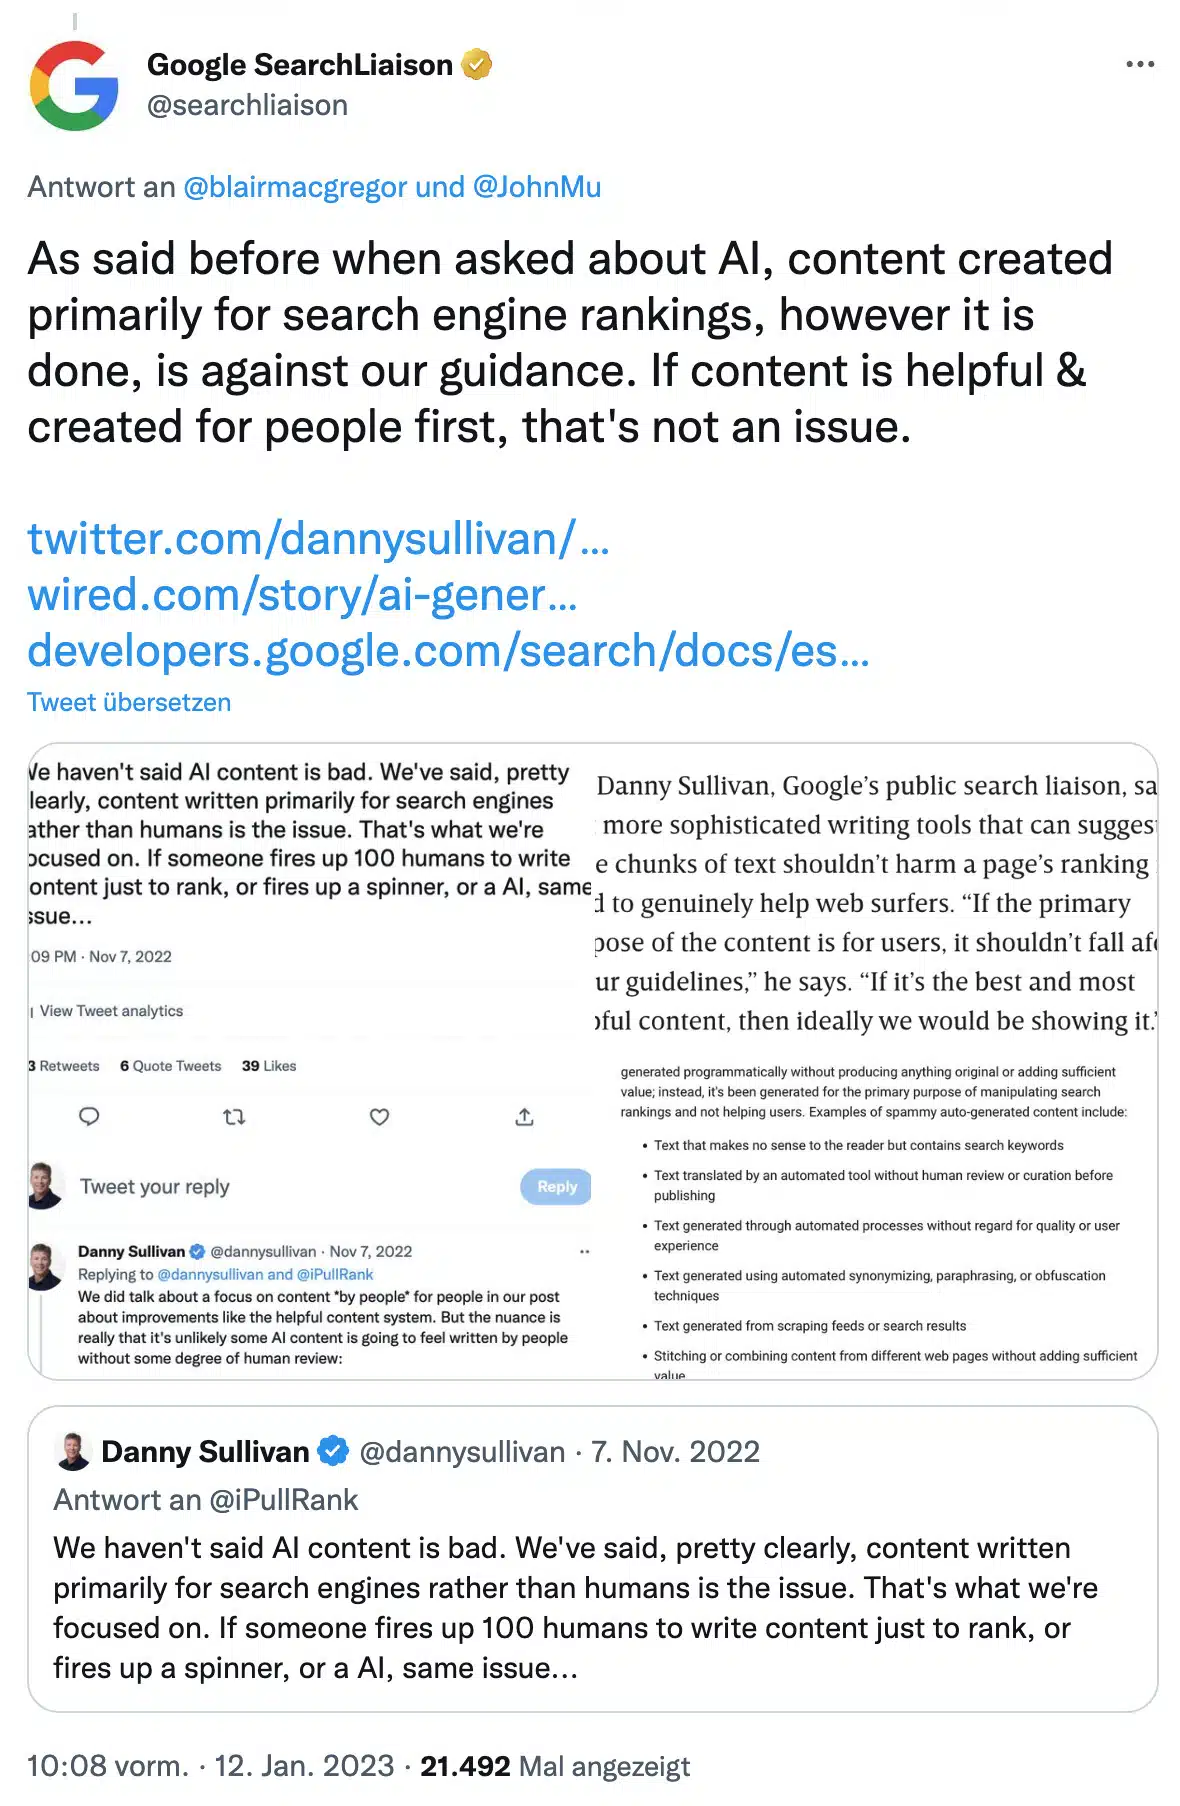 As said before when asked about Al, content created primarily for search engine rankings, however it is done, is against our guidance. If content is helpful & created for people first, that's not an issue.